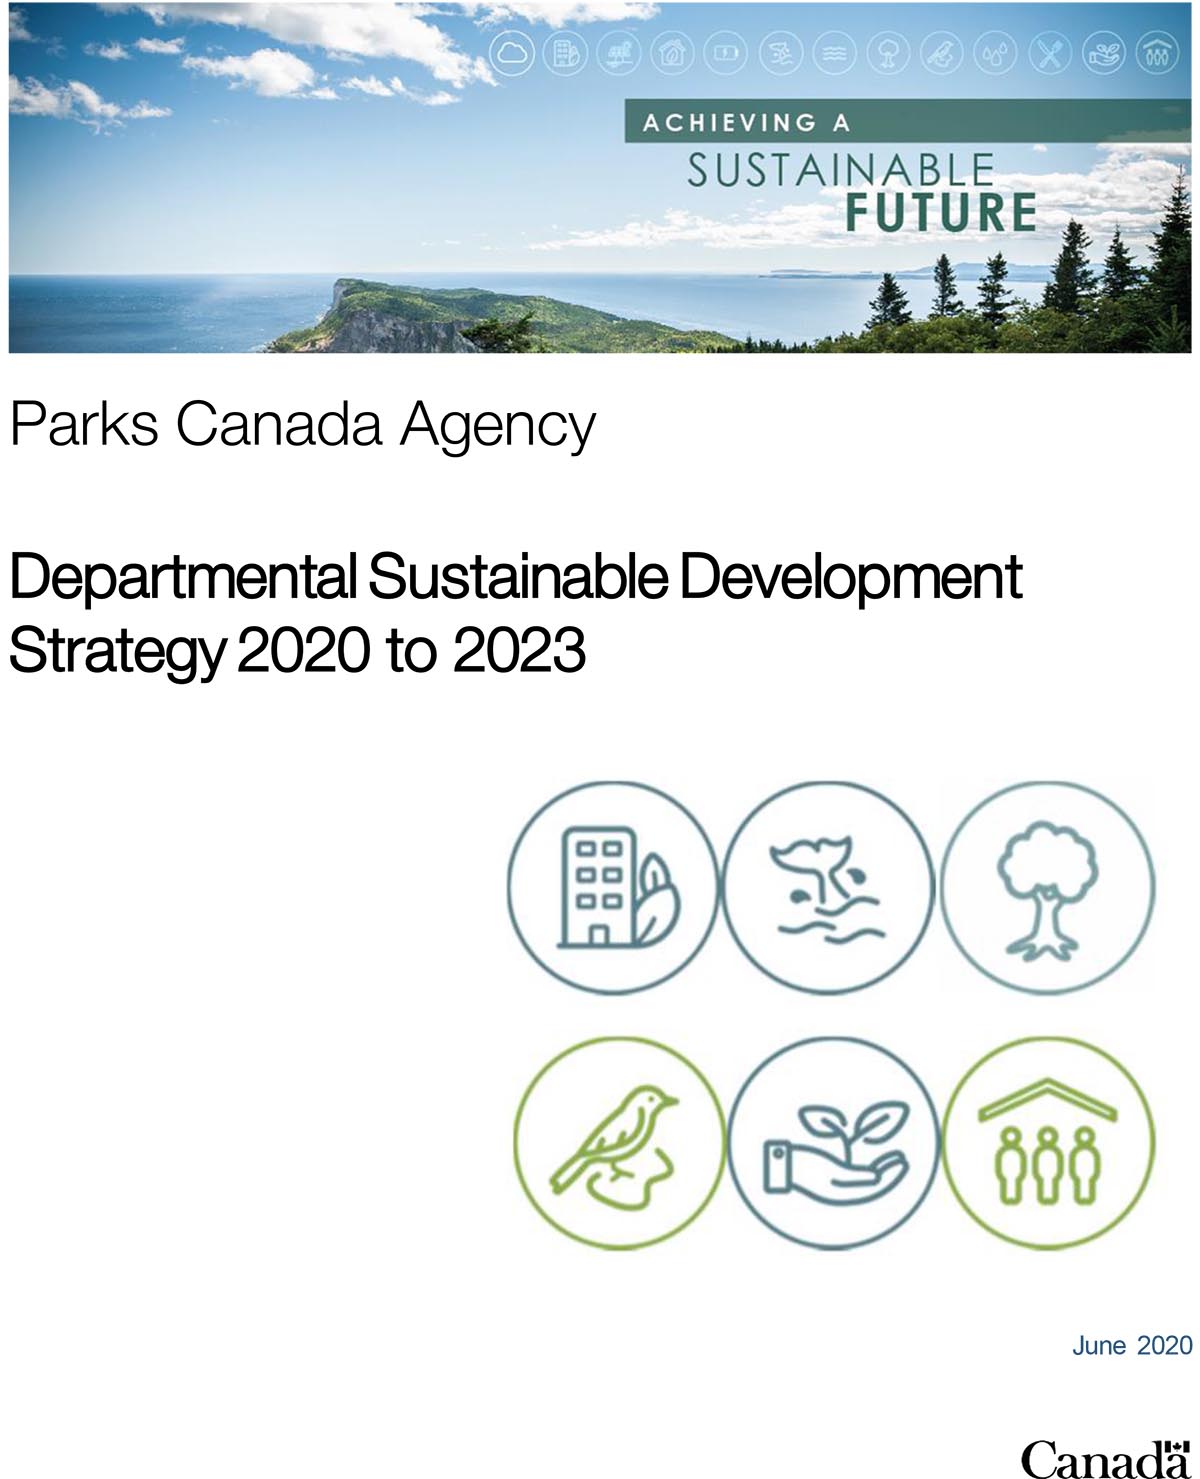 Achieving a Sustainable Future — Parks Canada Agency Departmental Sustainable Development Strategy 2020 to 2023